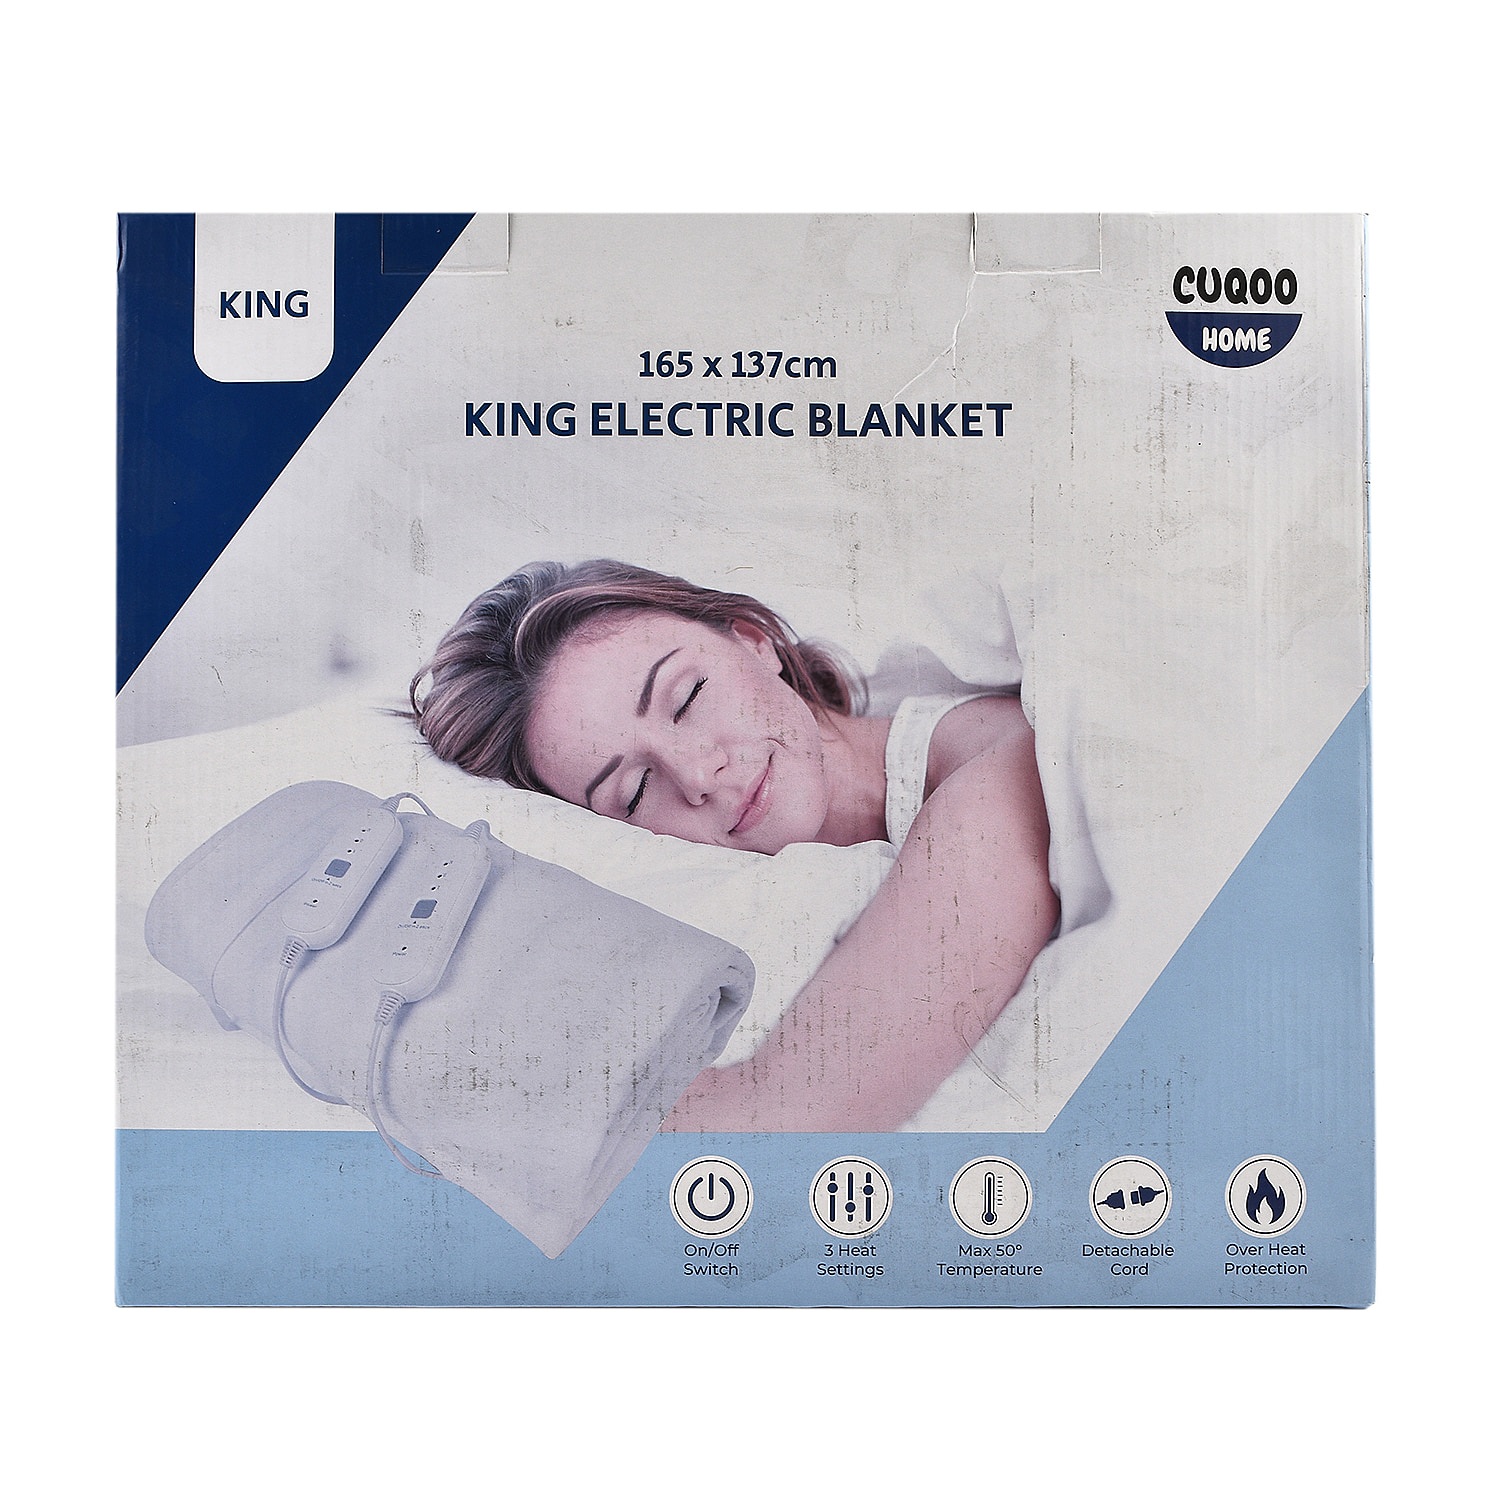 CUQOO Premium Heated Blanket with 3 Heat Setting and LED Indicator Light - White